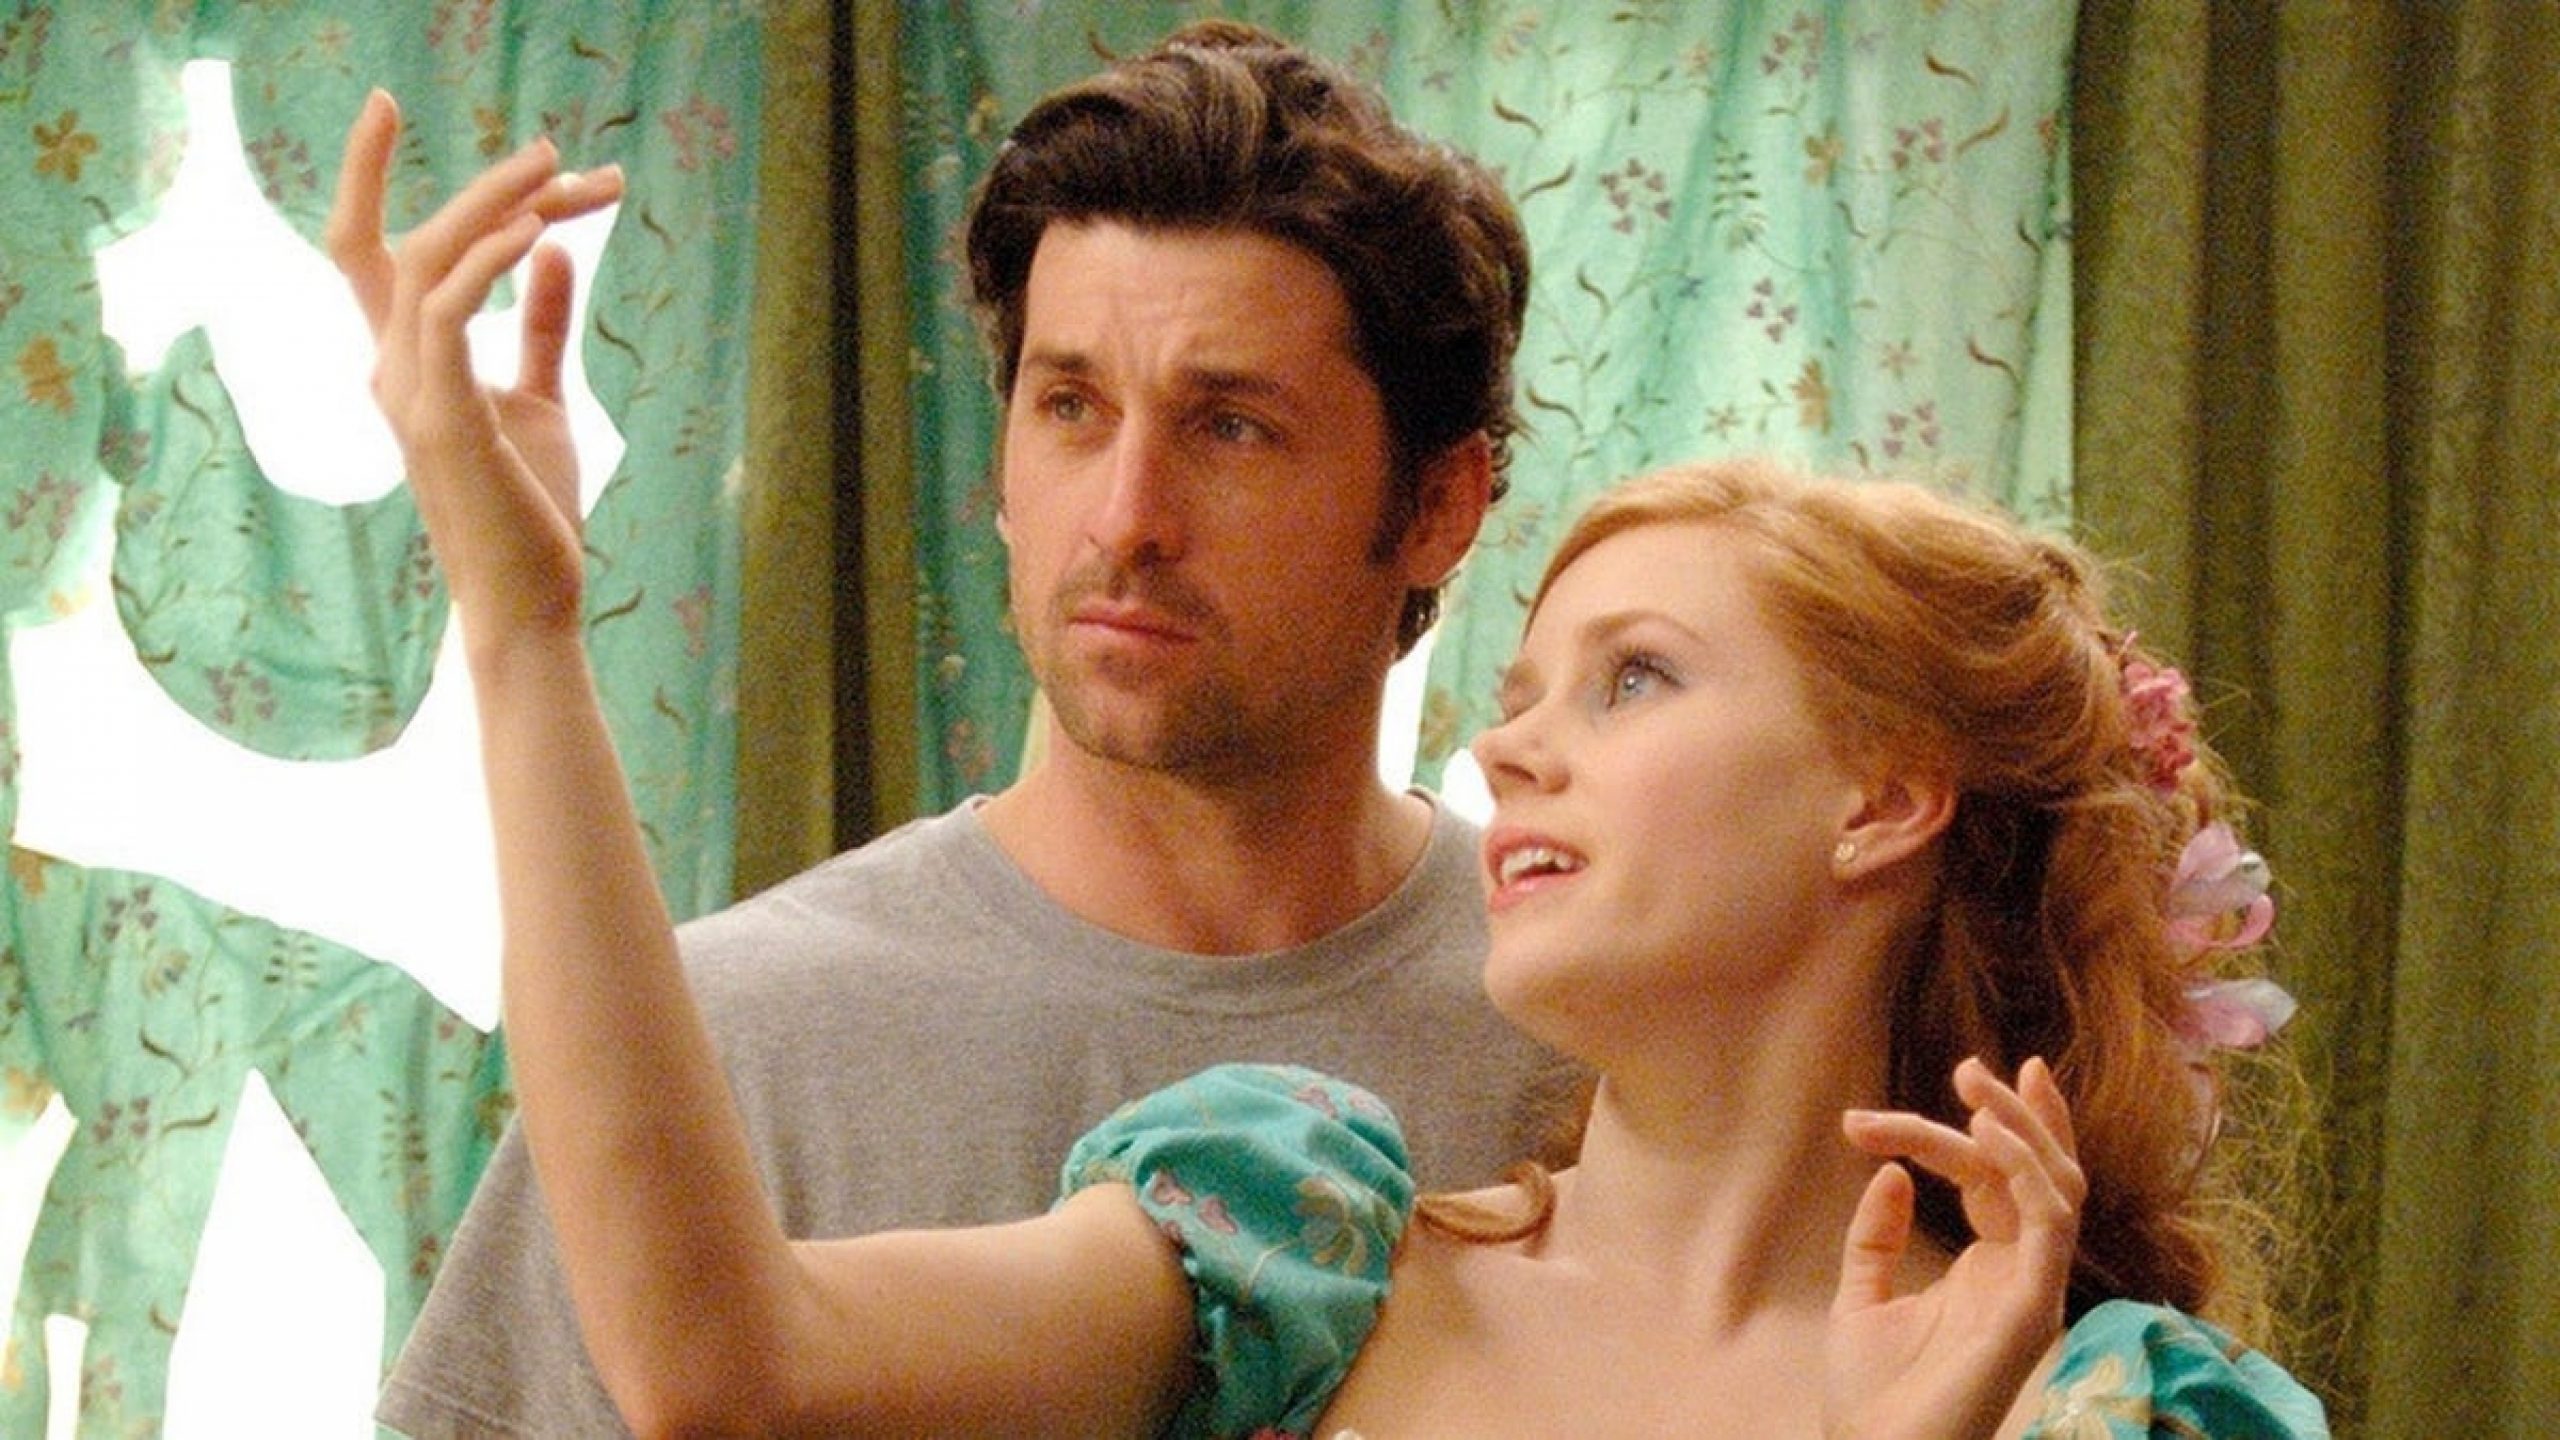 Enchanted Sequel, Disenchanted Heading to Disney+ in 2022